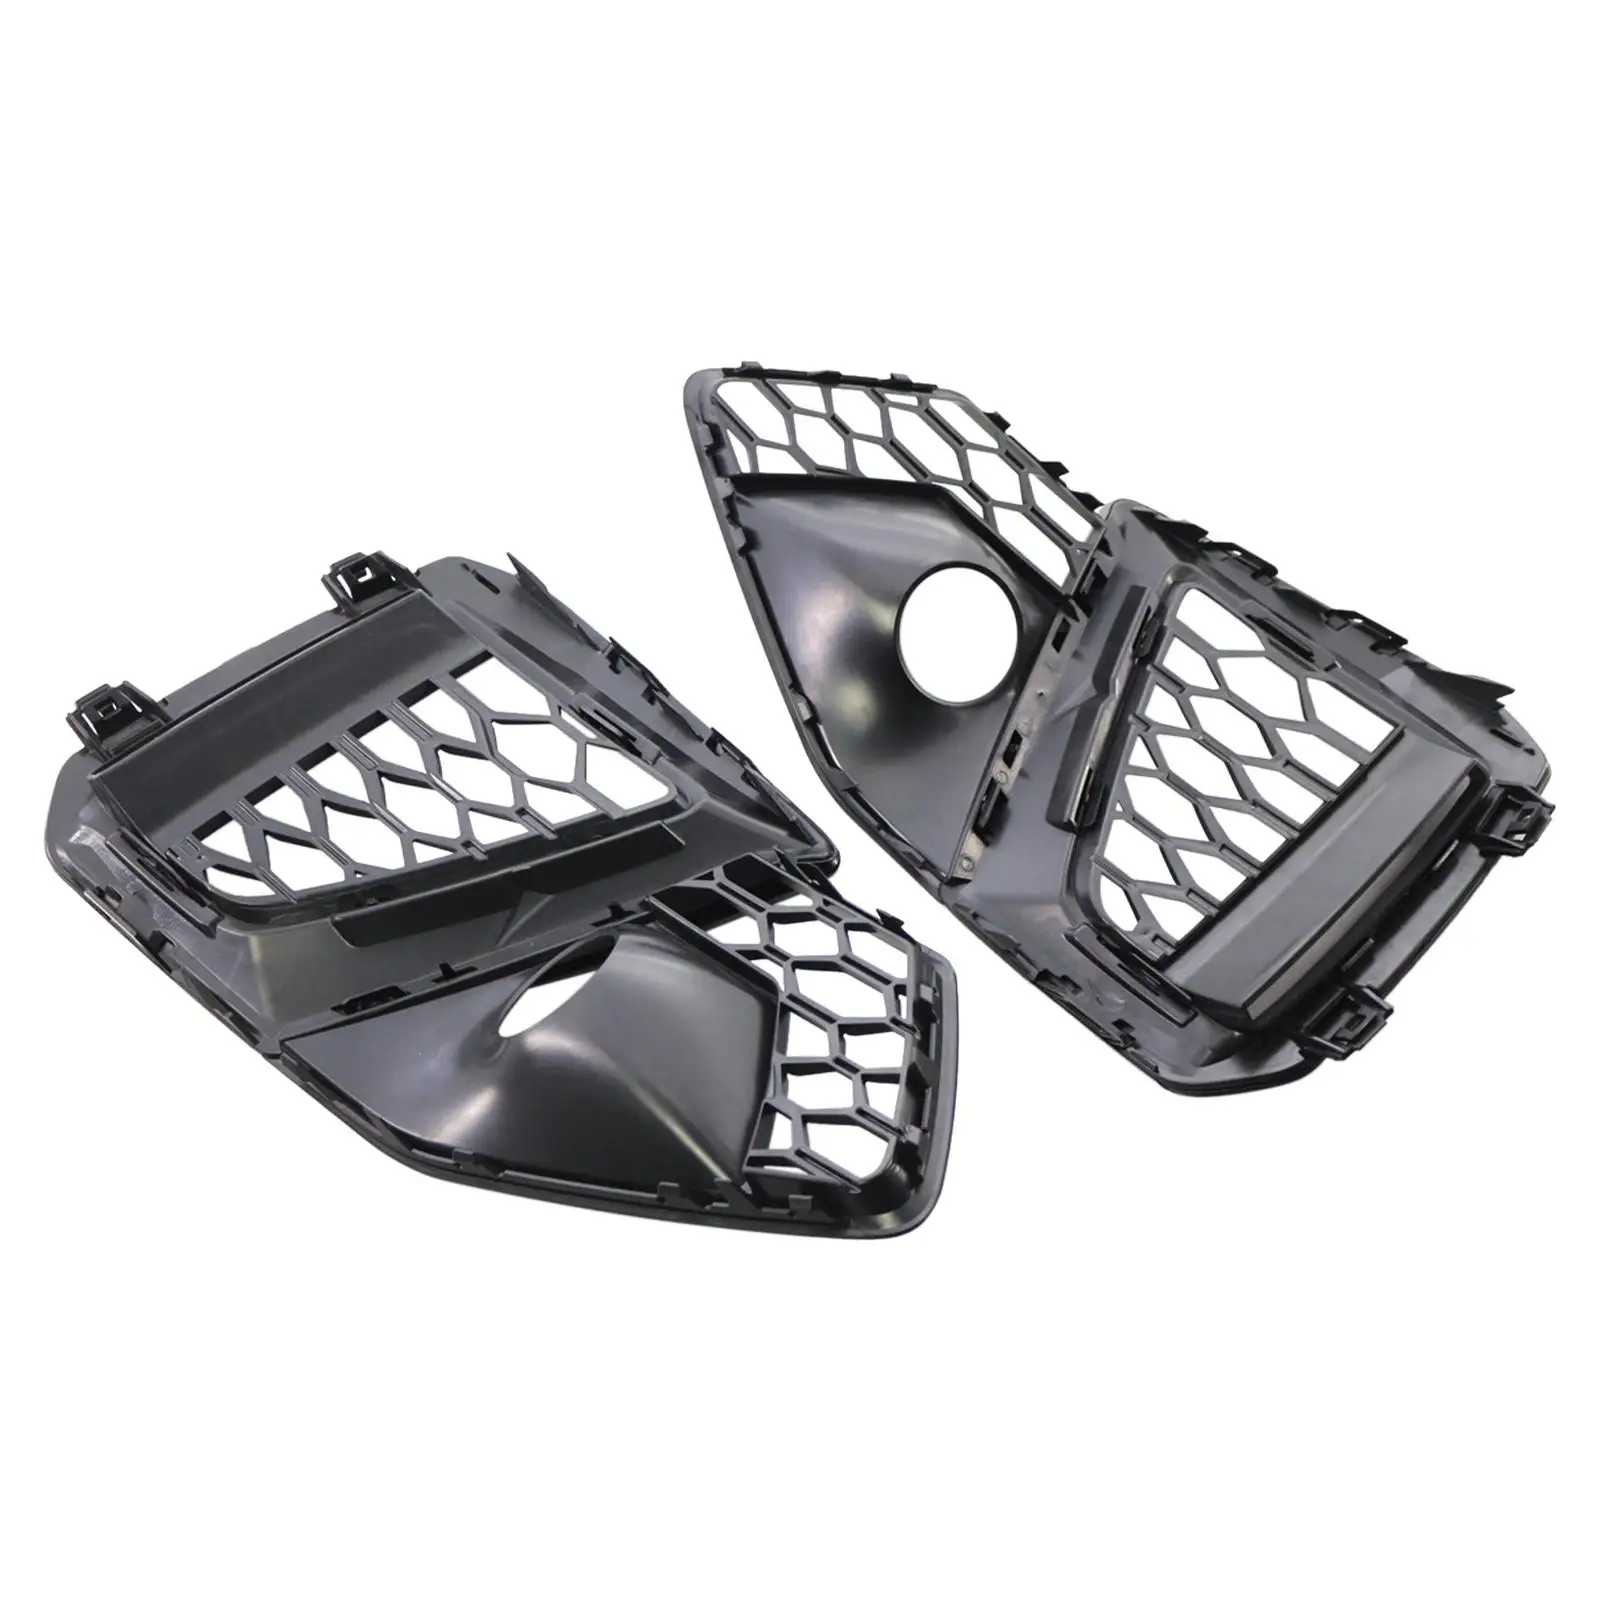 Pair of Fog Lamp Grille Assembly for S-Line Bumper Replacement Grill Cover for Audi S4 A4 20-2022 8WD807682M 8WD807681M